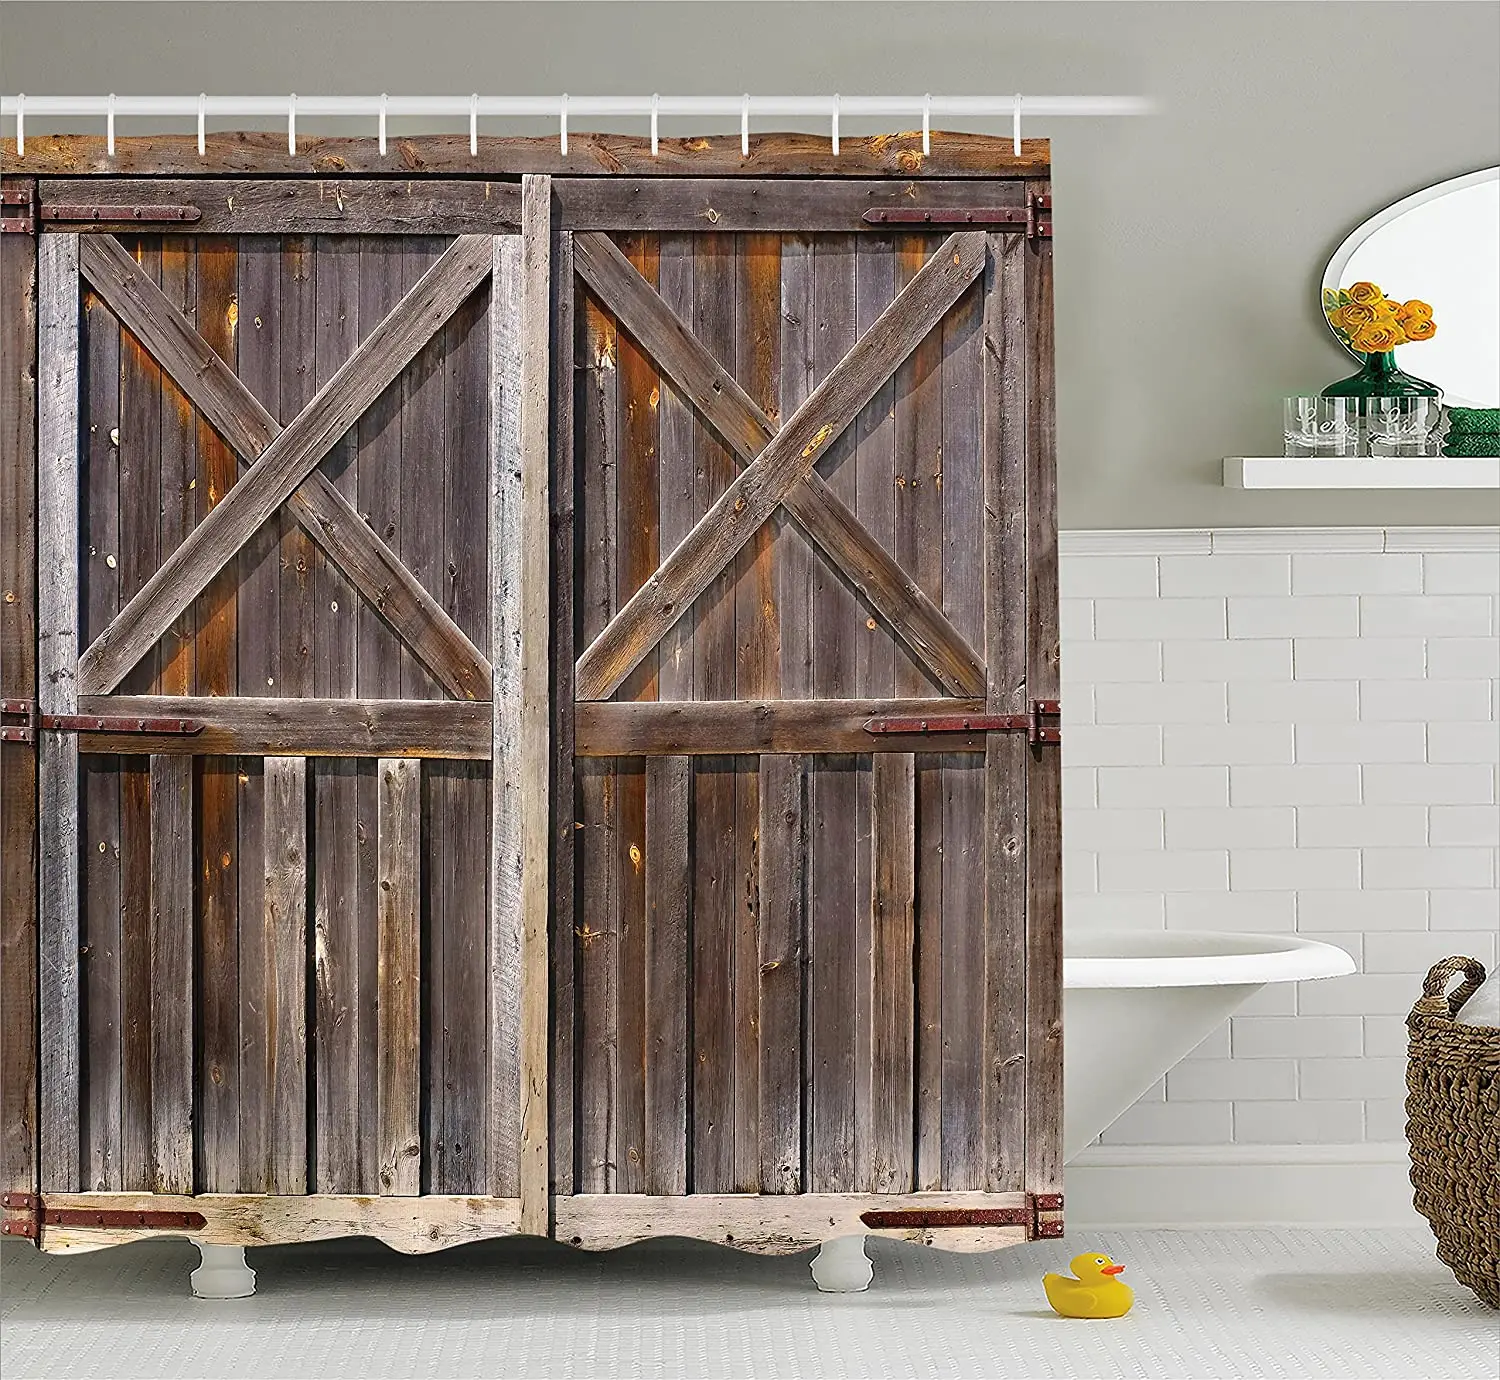 

Rustic Shower Curtain, Old Wooden Barn Door of Farmhouse Oak Countryside Village Board Rural Life Photo Print, Cloth F